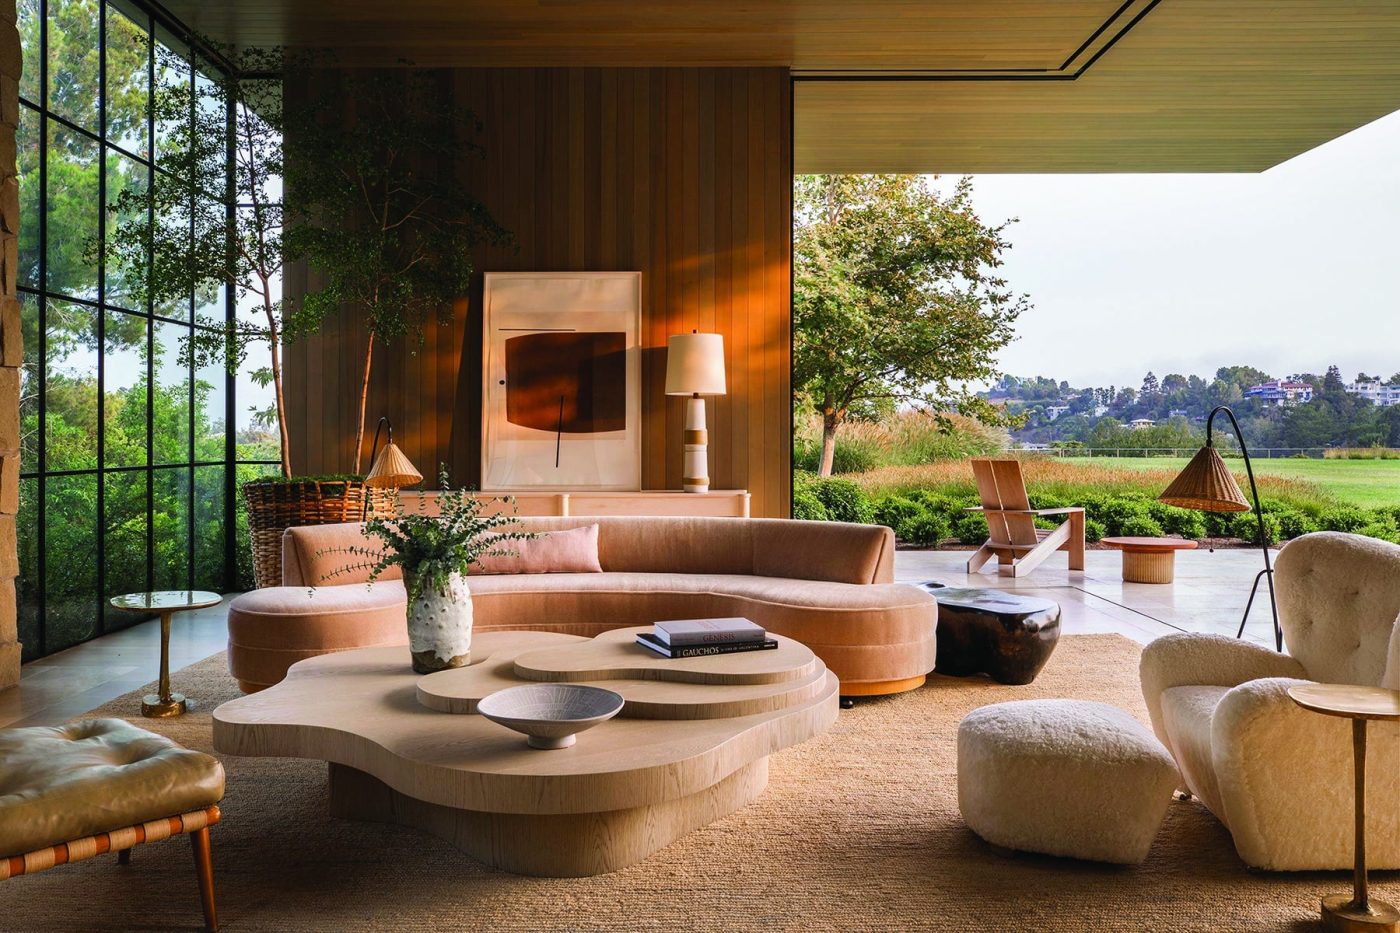 Indoor outdoor living room by Jamie Bush + CO in Los Angeles's Mandeville Canyon with retractable wall of glass open on corner and furniture by Henge, Flemming LAssen and T.H. Robsjohn-Gibbons